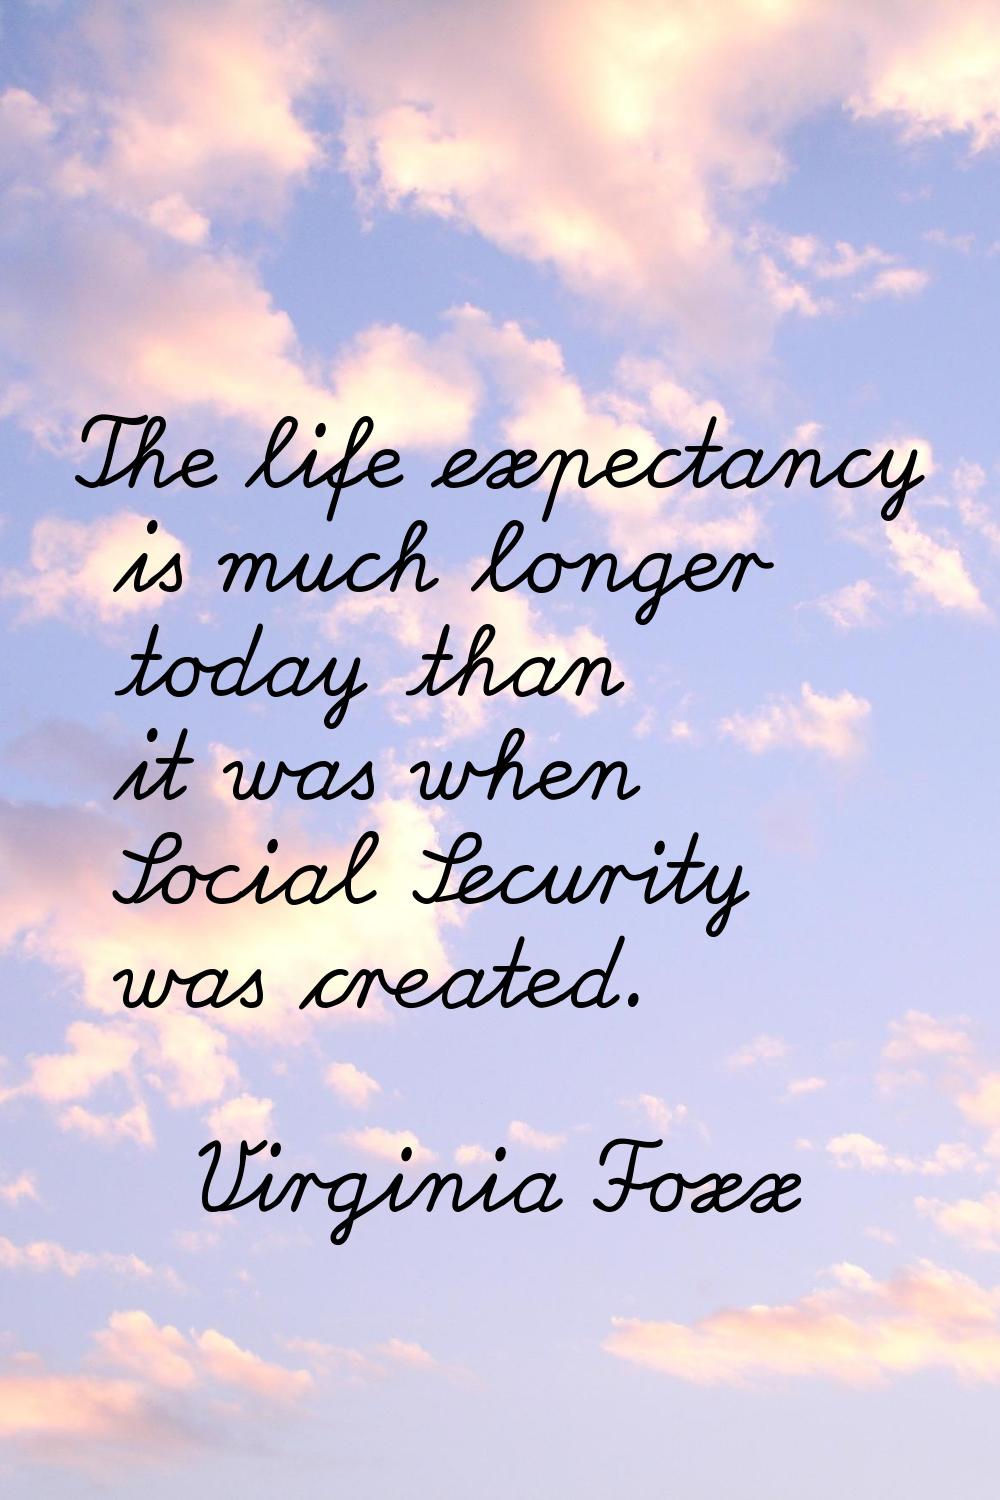 The life expectancy is much longer today than it was when Social Security was created.